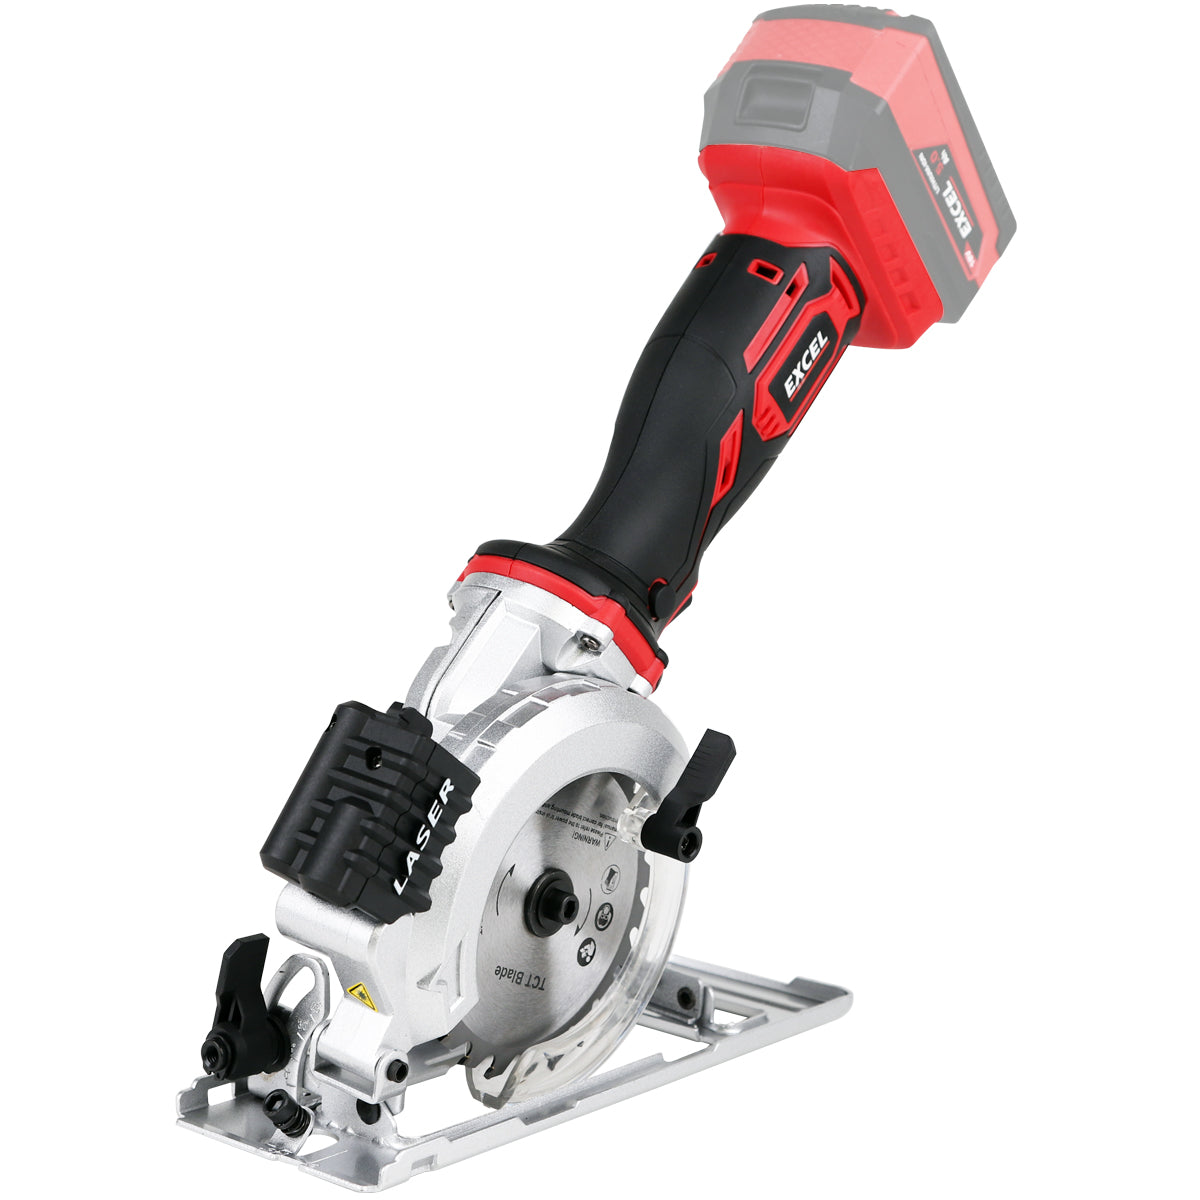 Excel 18V 115mm Mini Circular Saw with 1 x 5.0Ah Battery & Charger